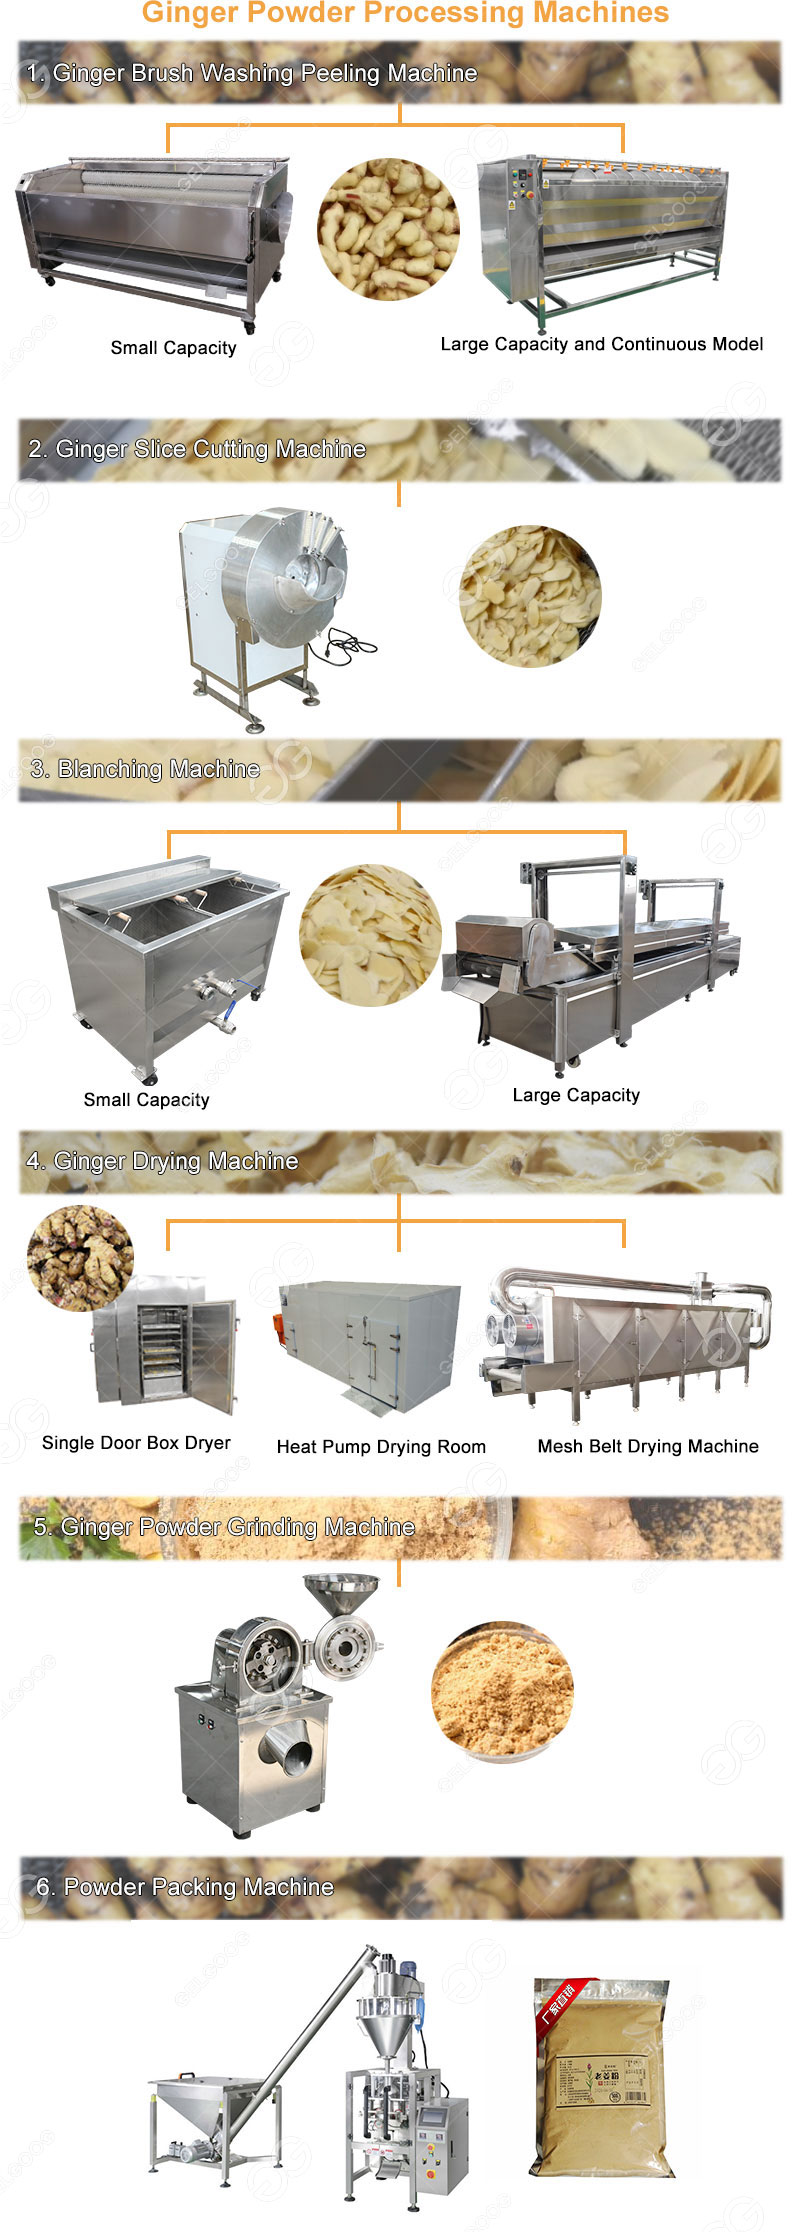 Fully Automatic Ginger Powder Processing Plant